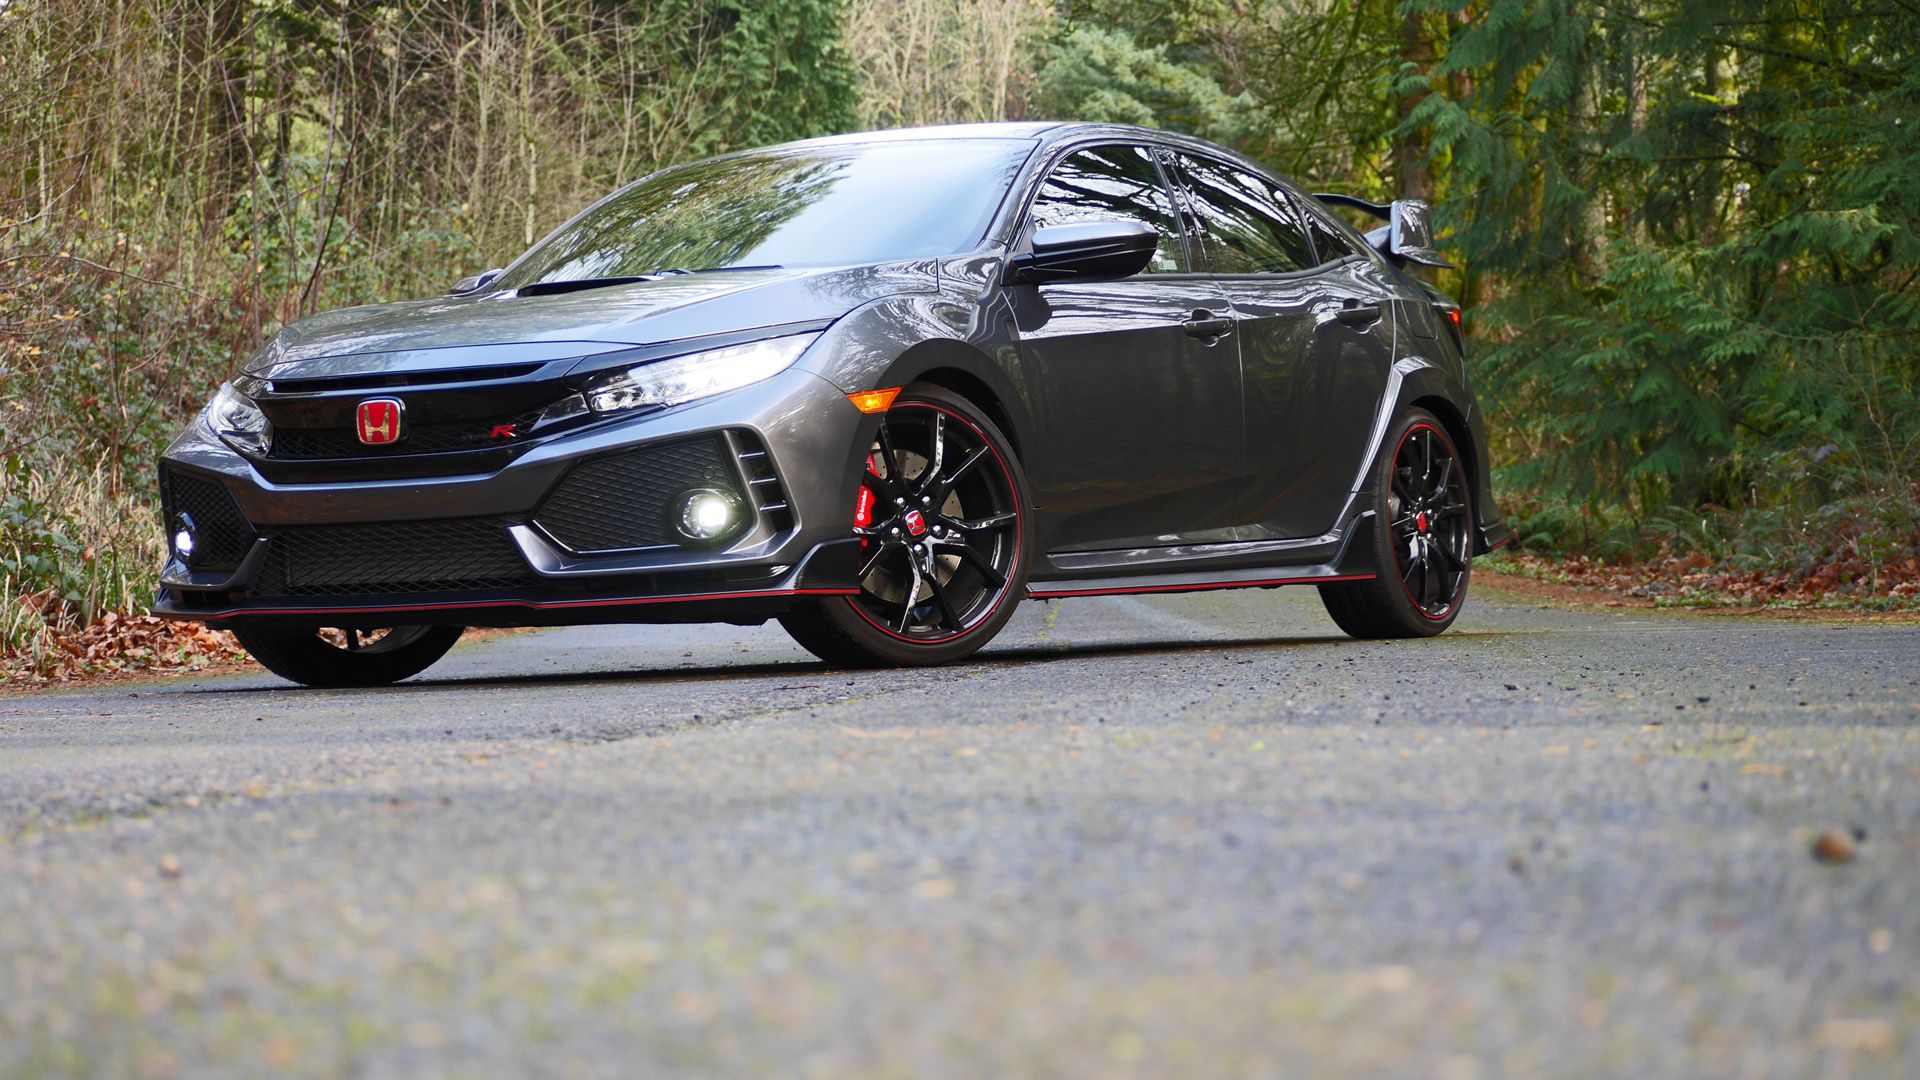 Honda Civic Type R Review. Performance, styling, driving impressions